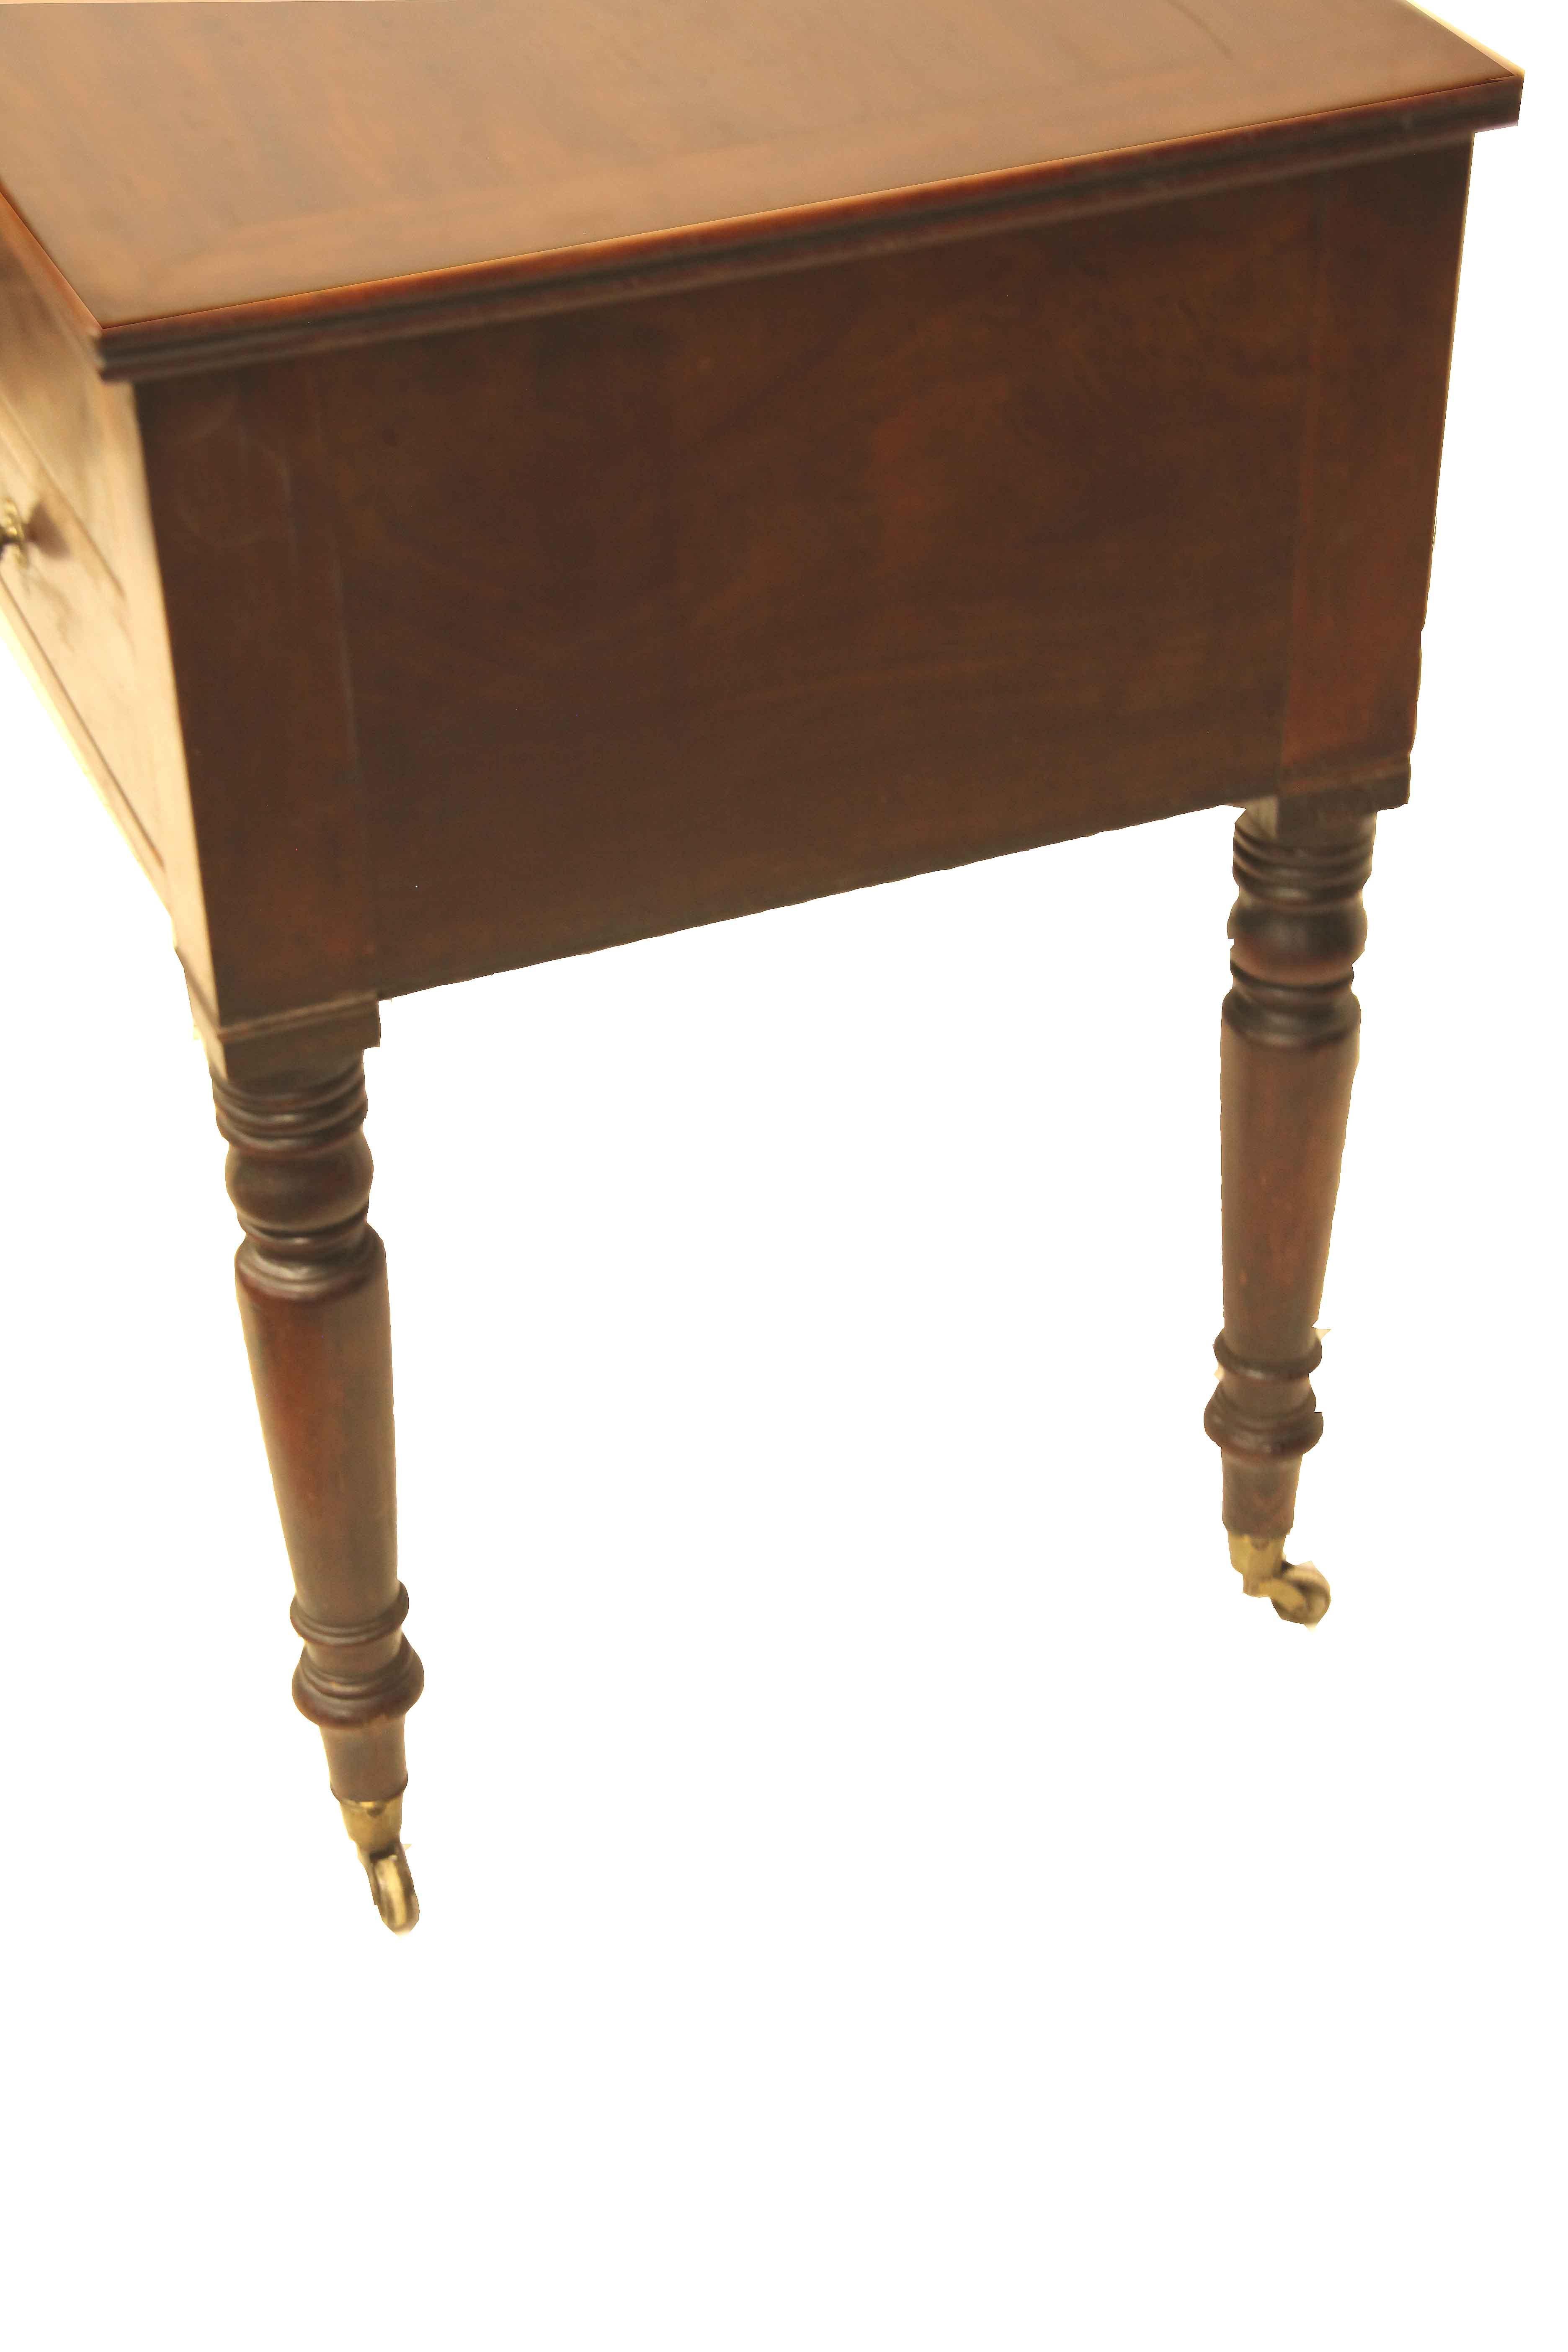 English Mahogany Turned Leg Serving Table In Good Condition For Sale In Wilson, NC